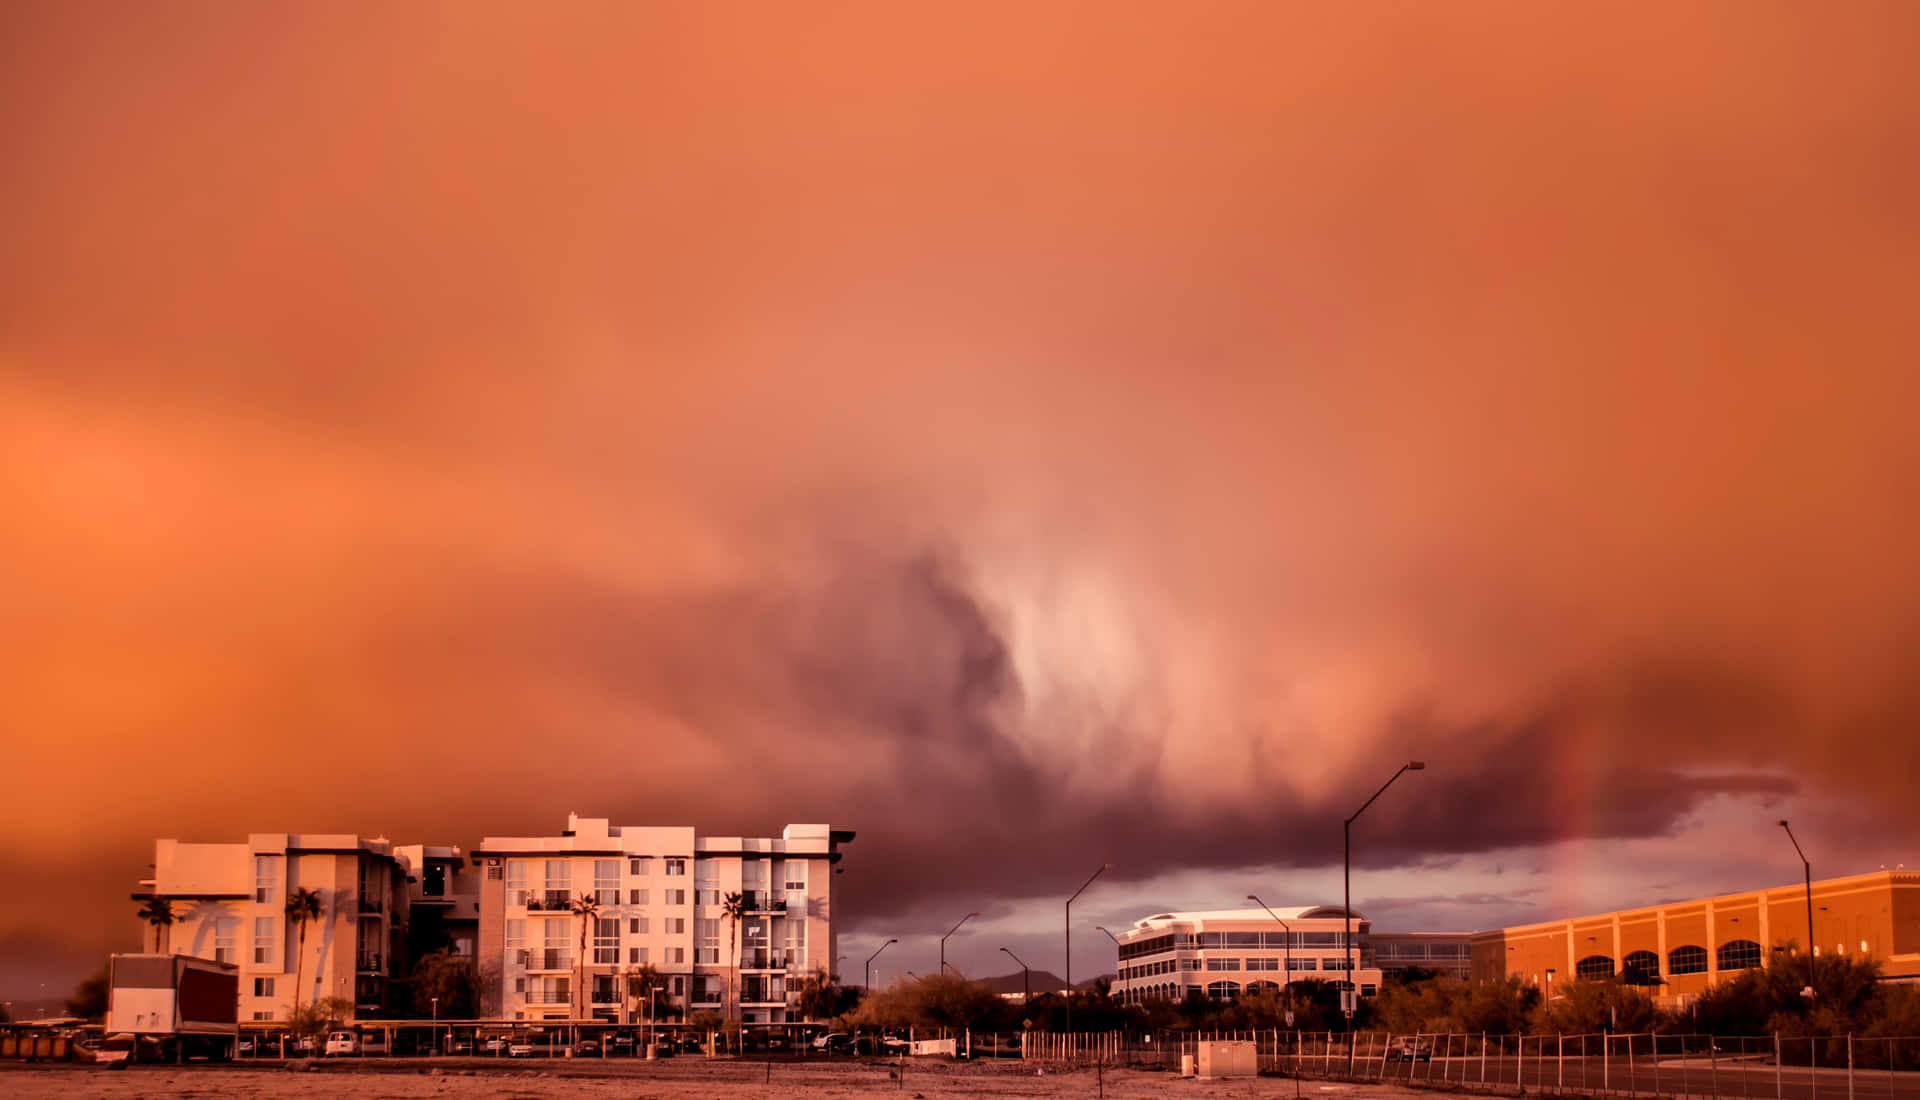 Approaching Dust Storm Over Cityscape Wallpaper